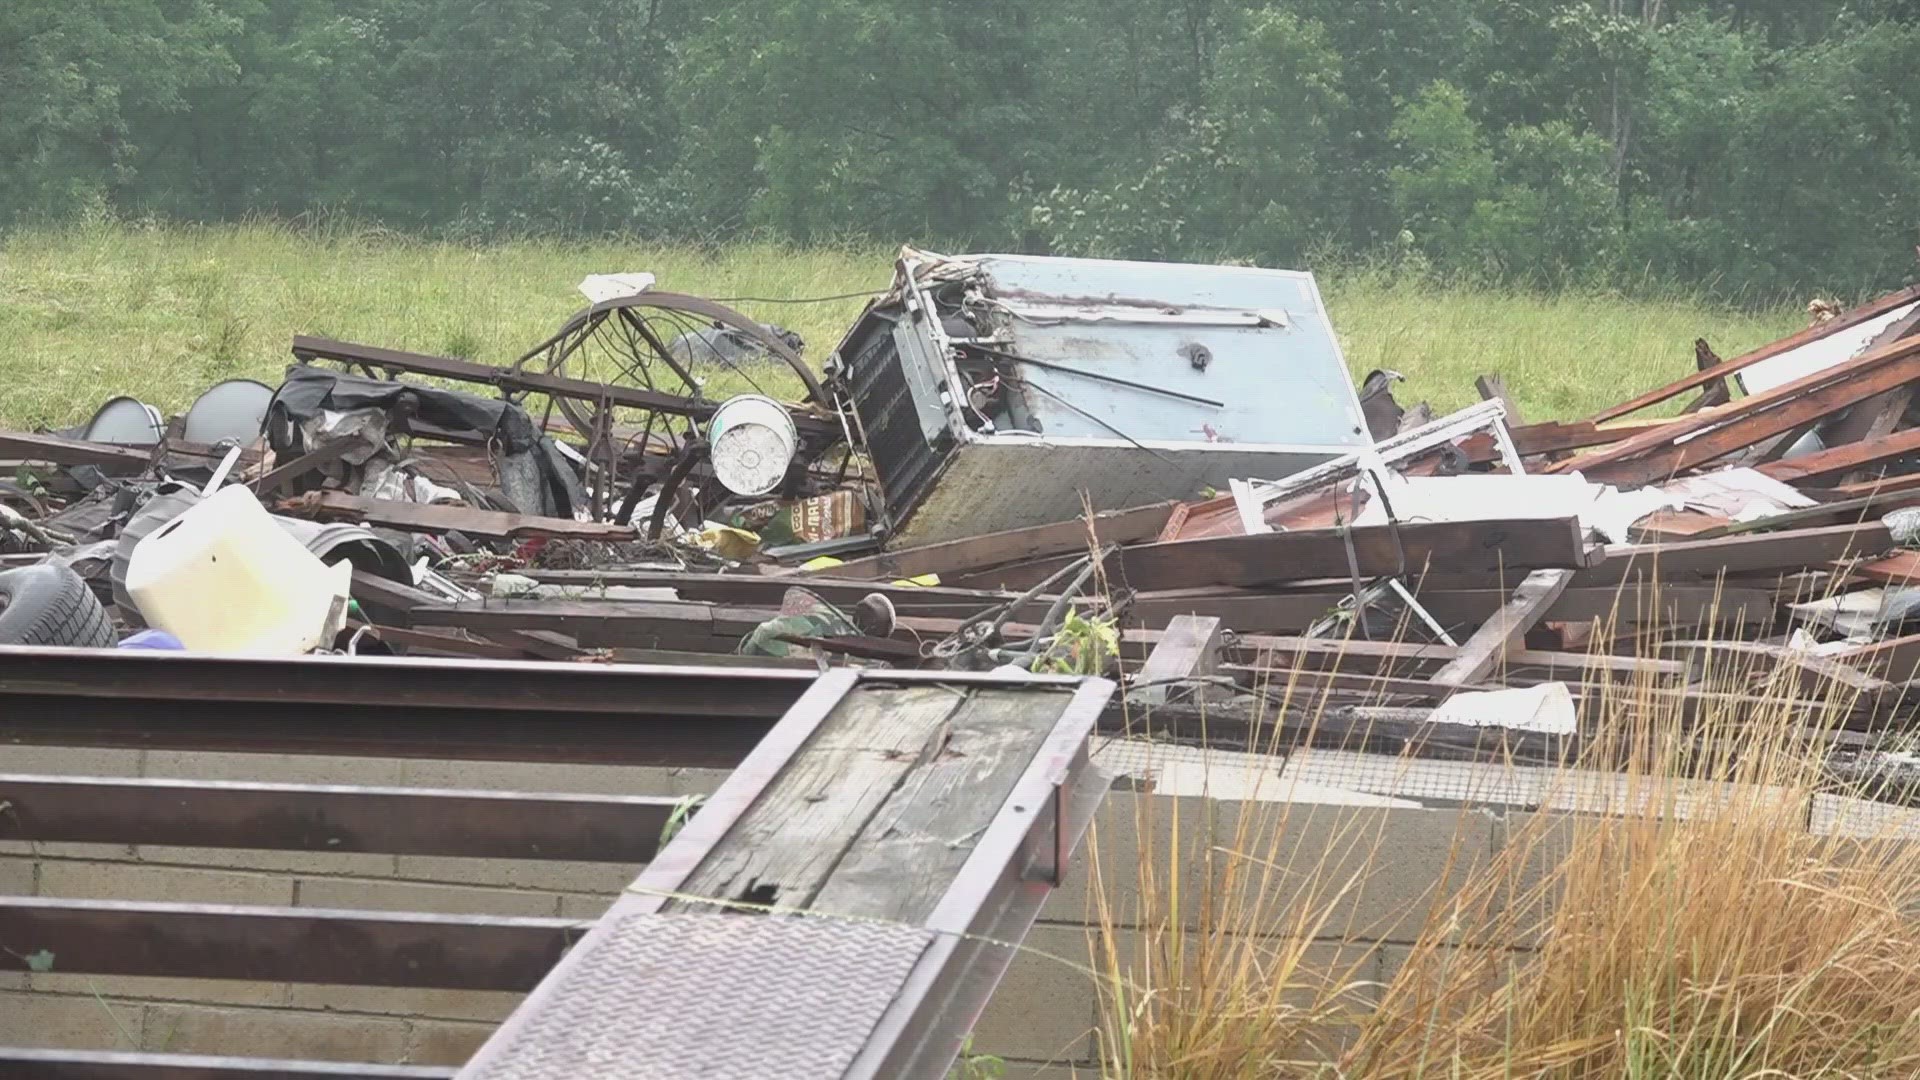 People in Cumberland and Fentress counties said it happened in a blink of an eye Sunday. Thankfully, it appears no one was hurt in the storms.